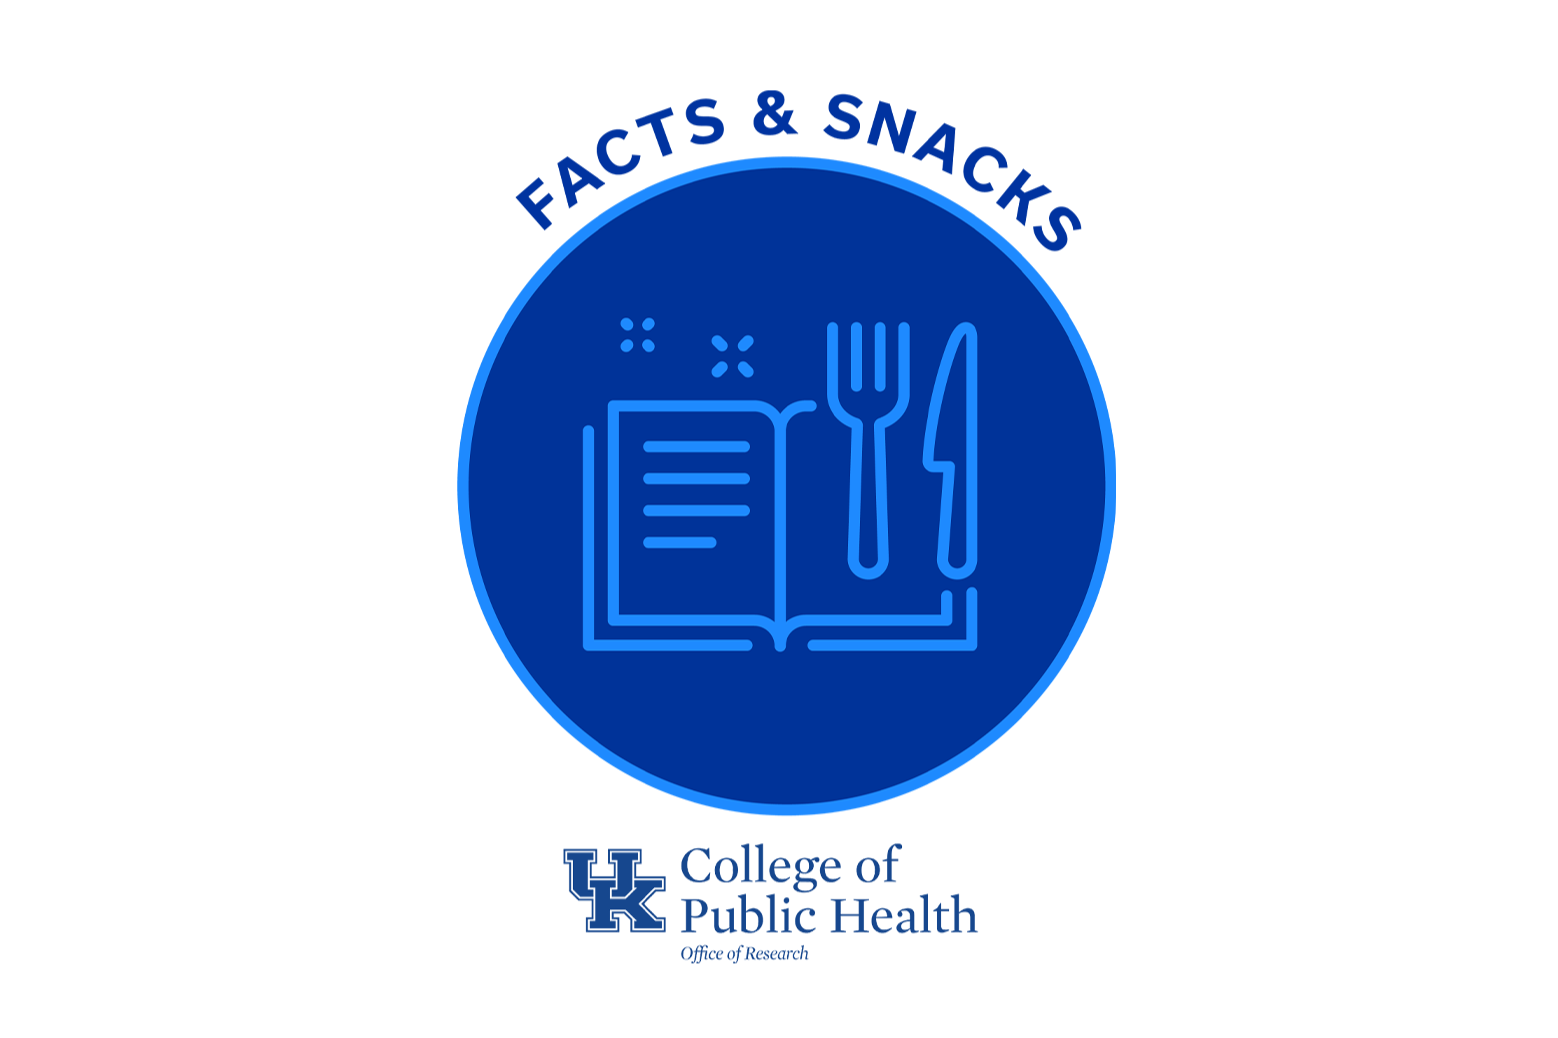 a digital graphic saying "facts & snacks" with an icon of a book and eating flatware, and the College of Public Health logo